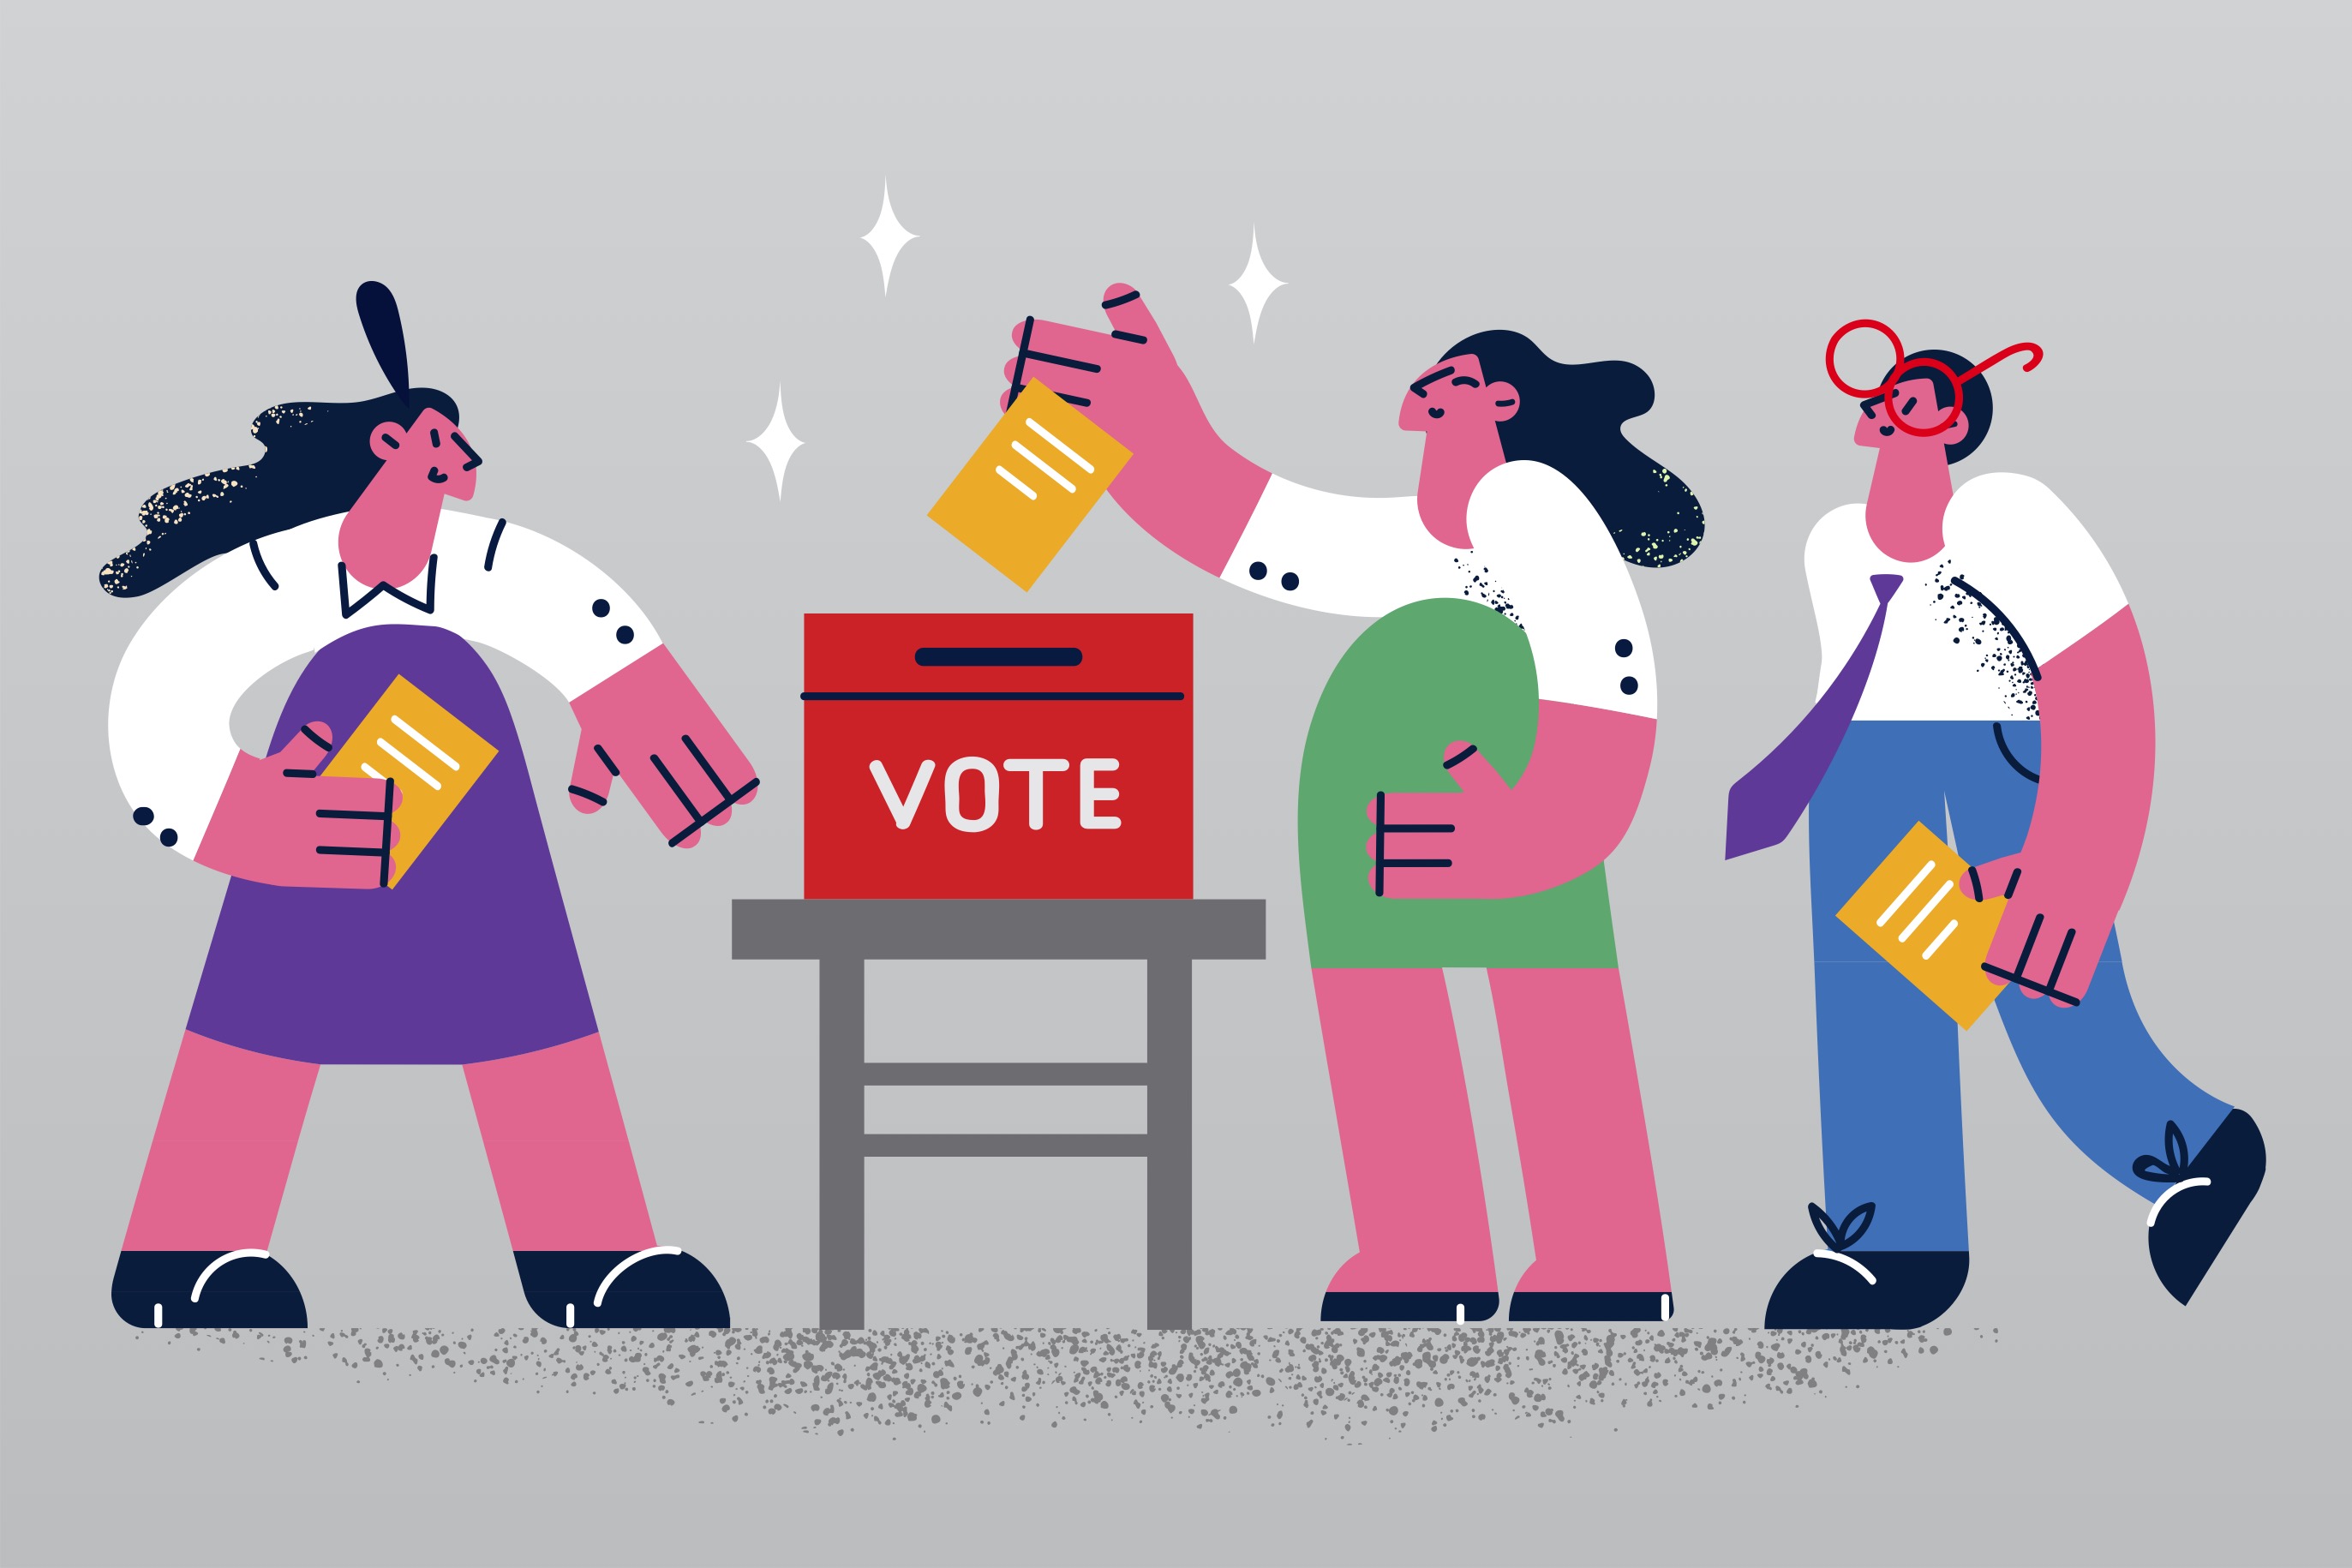 An illustration in bright colors on a gray background, showing three people standing around a ballot box with the word “vote.” Each person holds a ballot. One woman drops her ballot into the box.